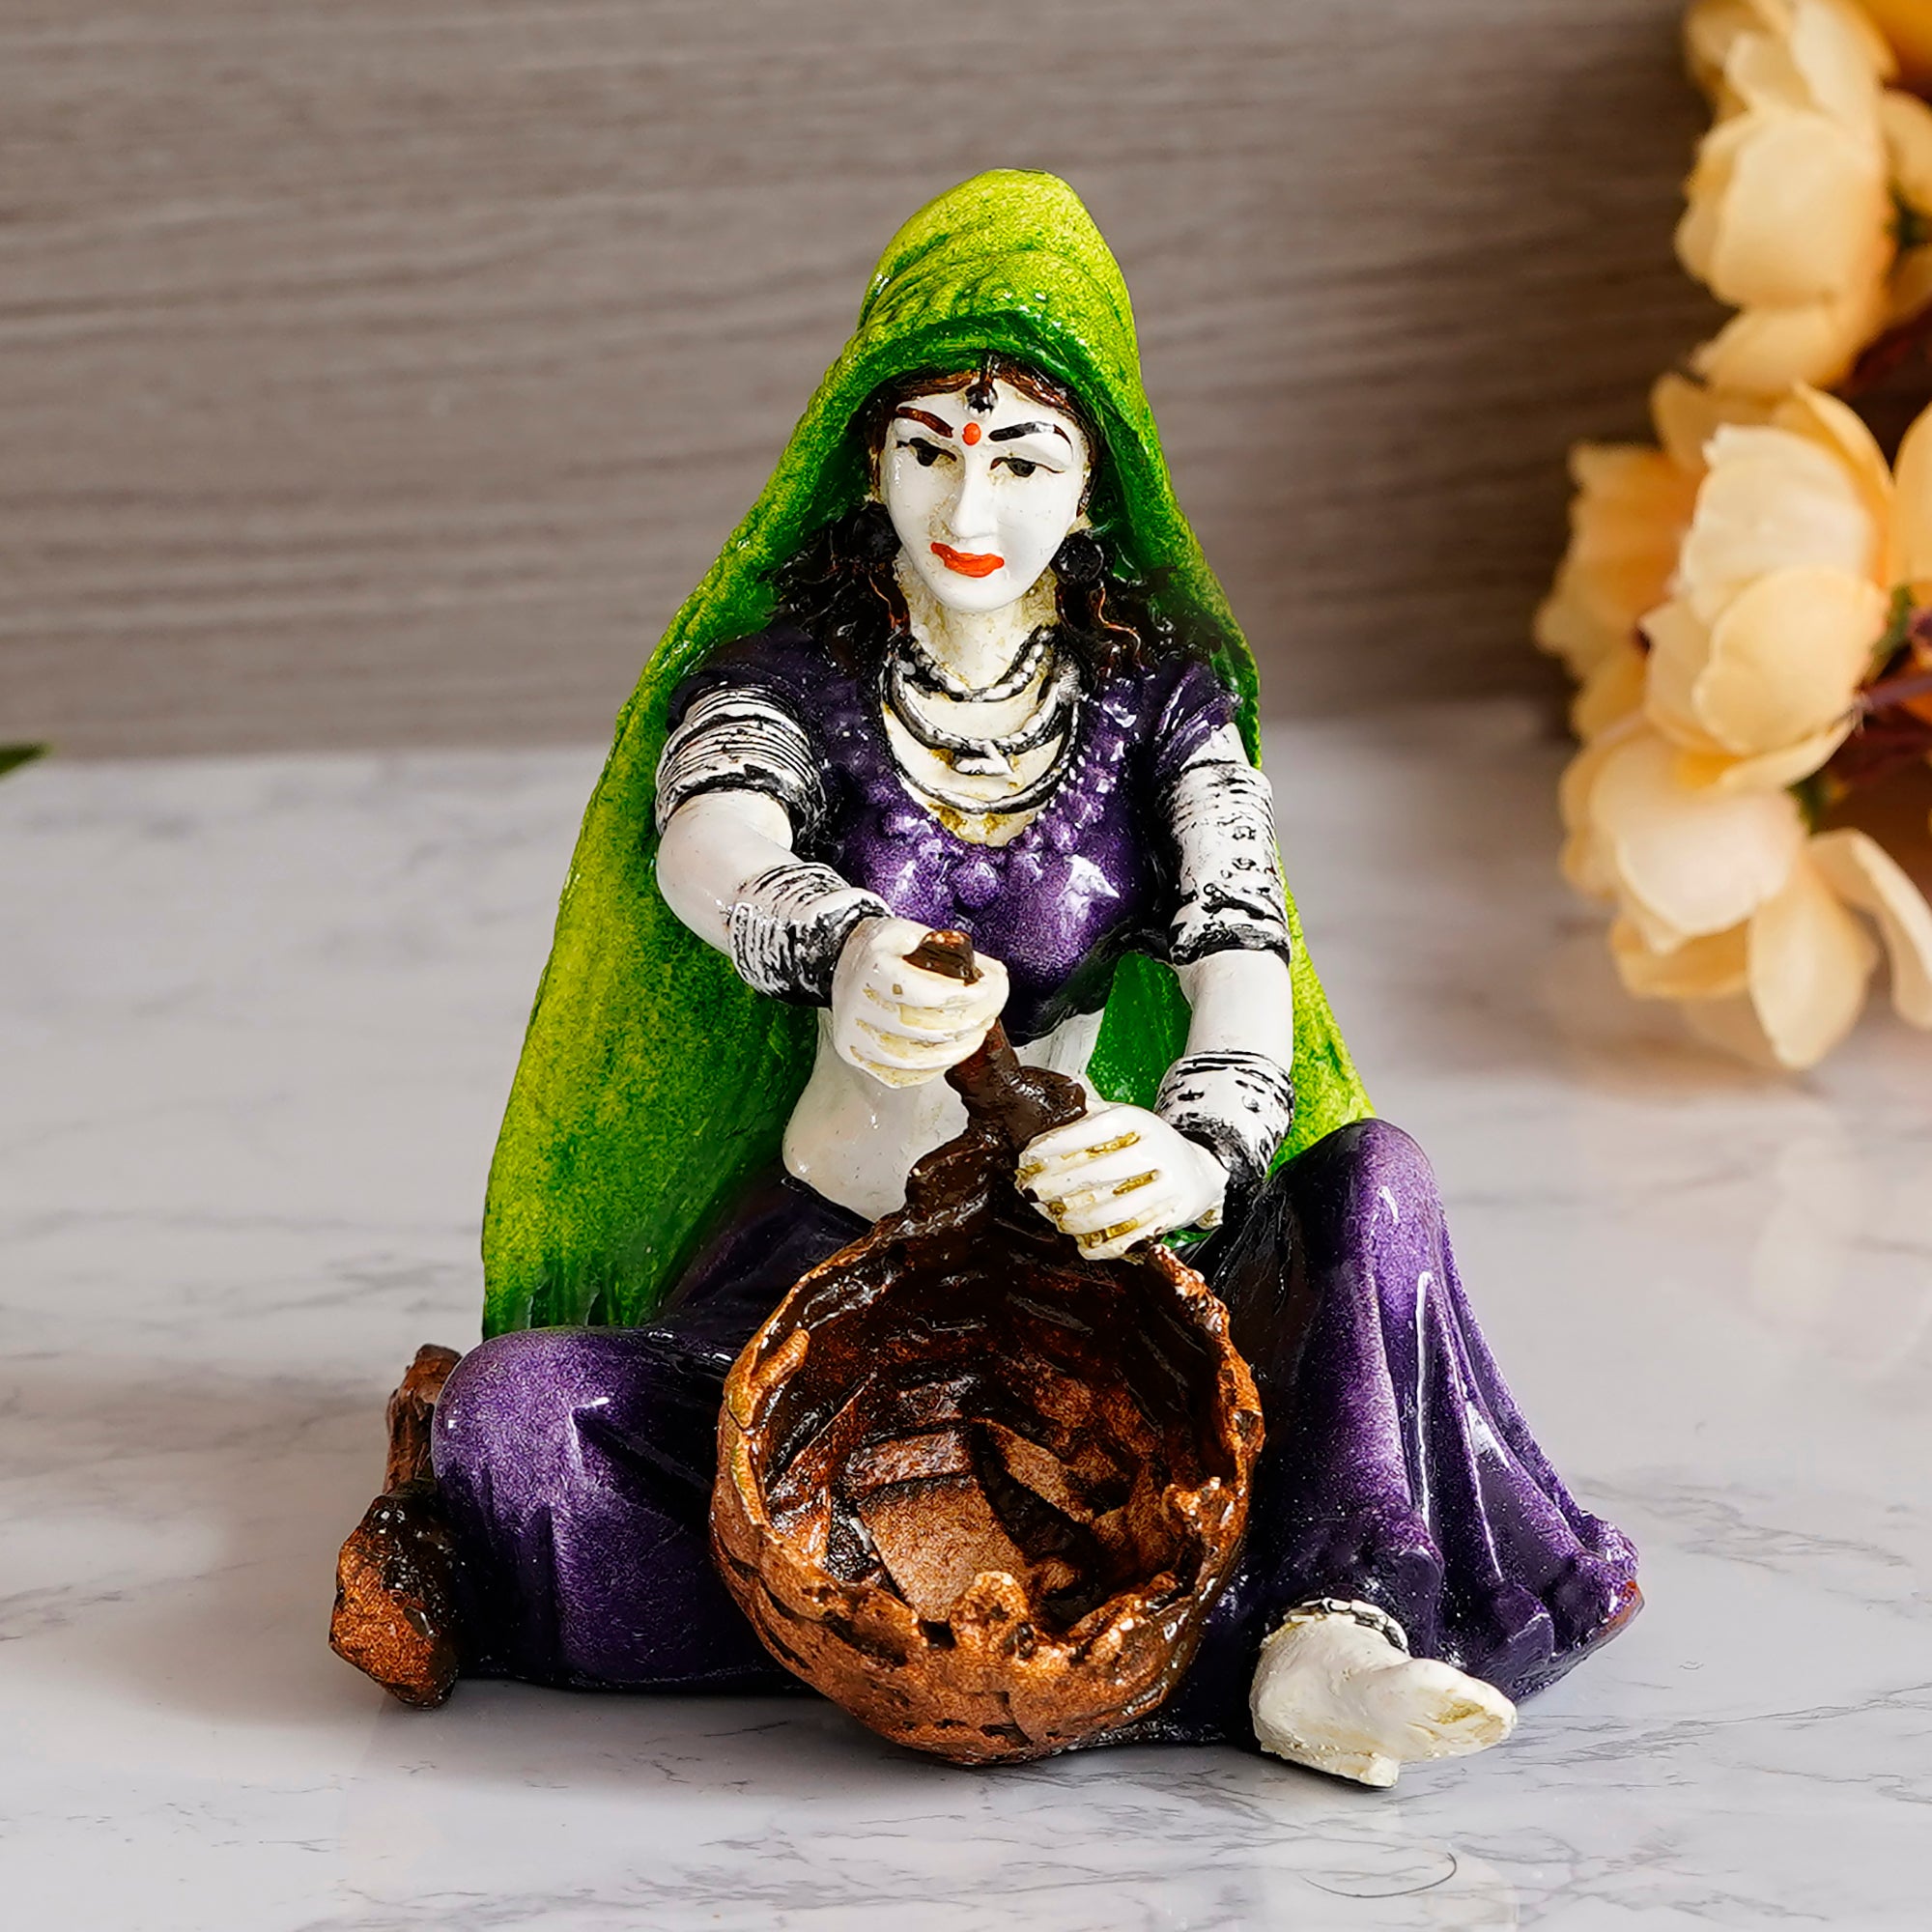 Polyresin Rajasthani Lady Creating Craft Product Handcrafted Human Figurine Decorative Showpiece 1